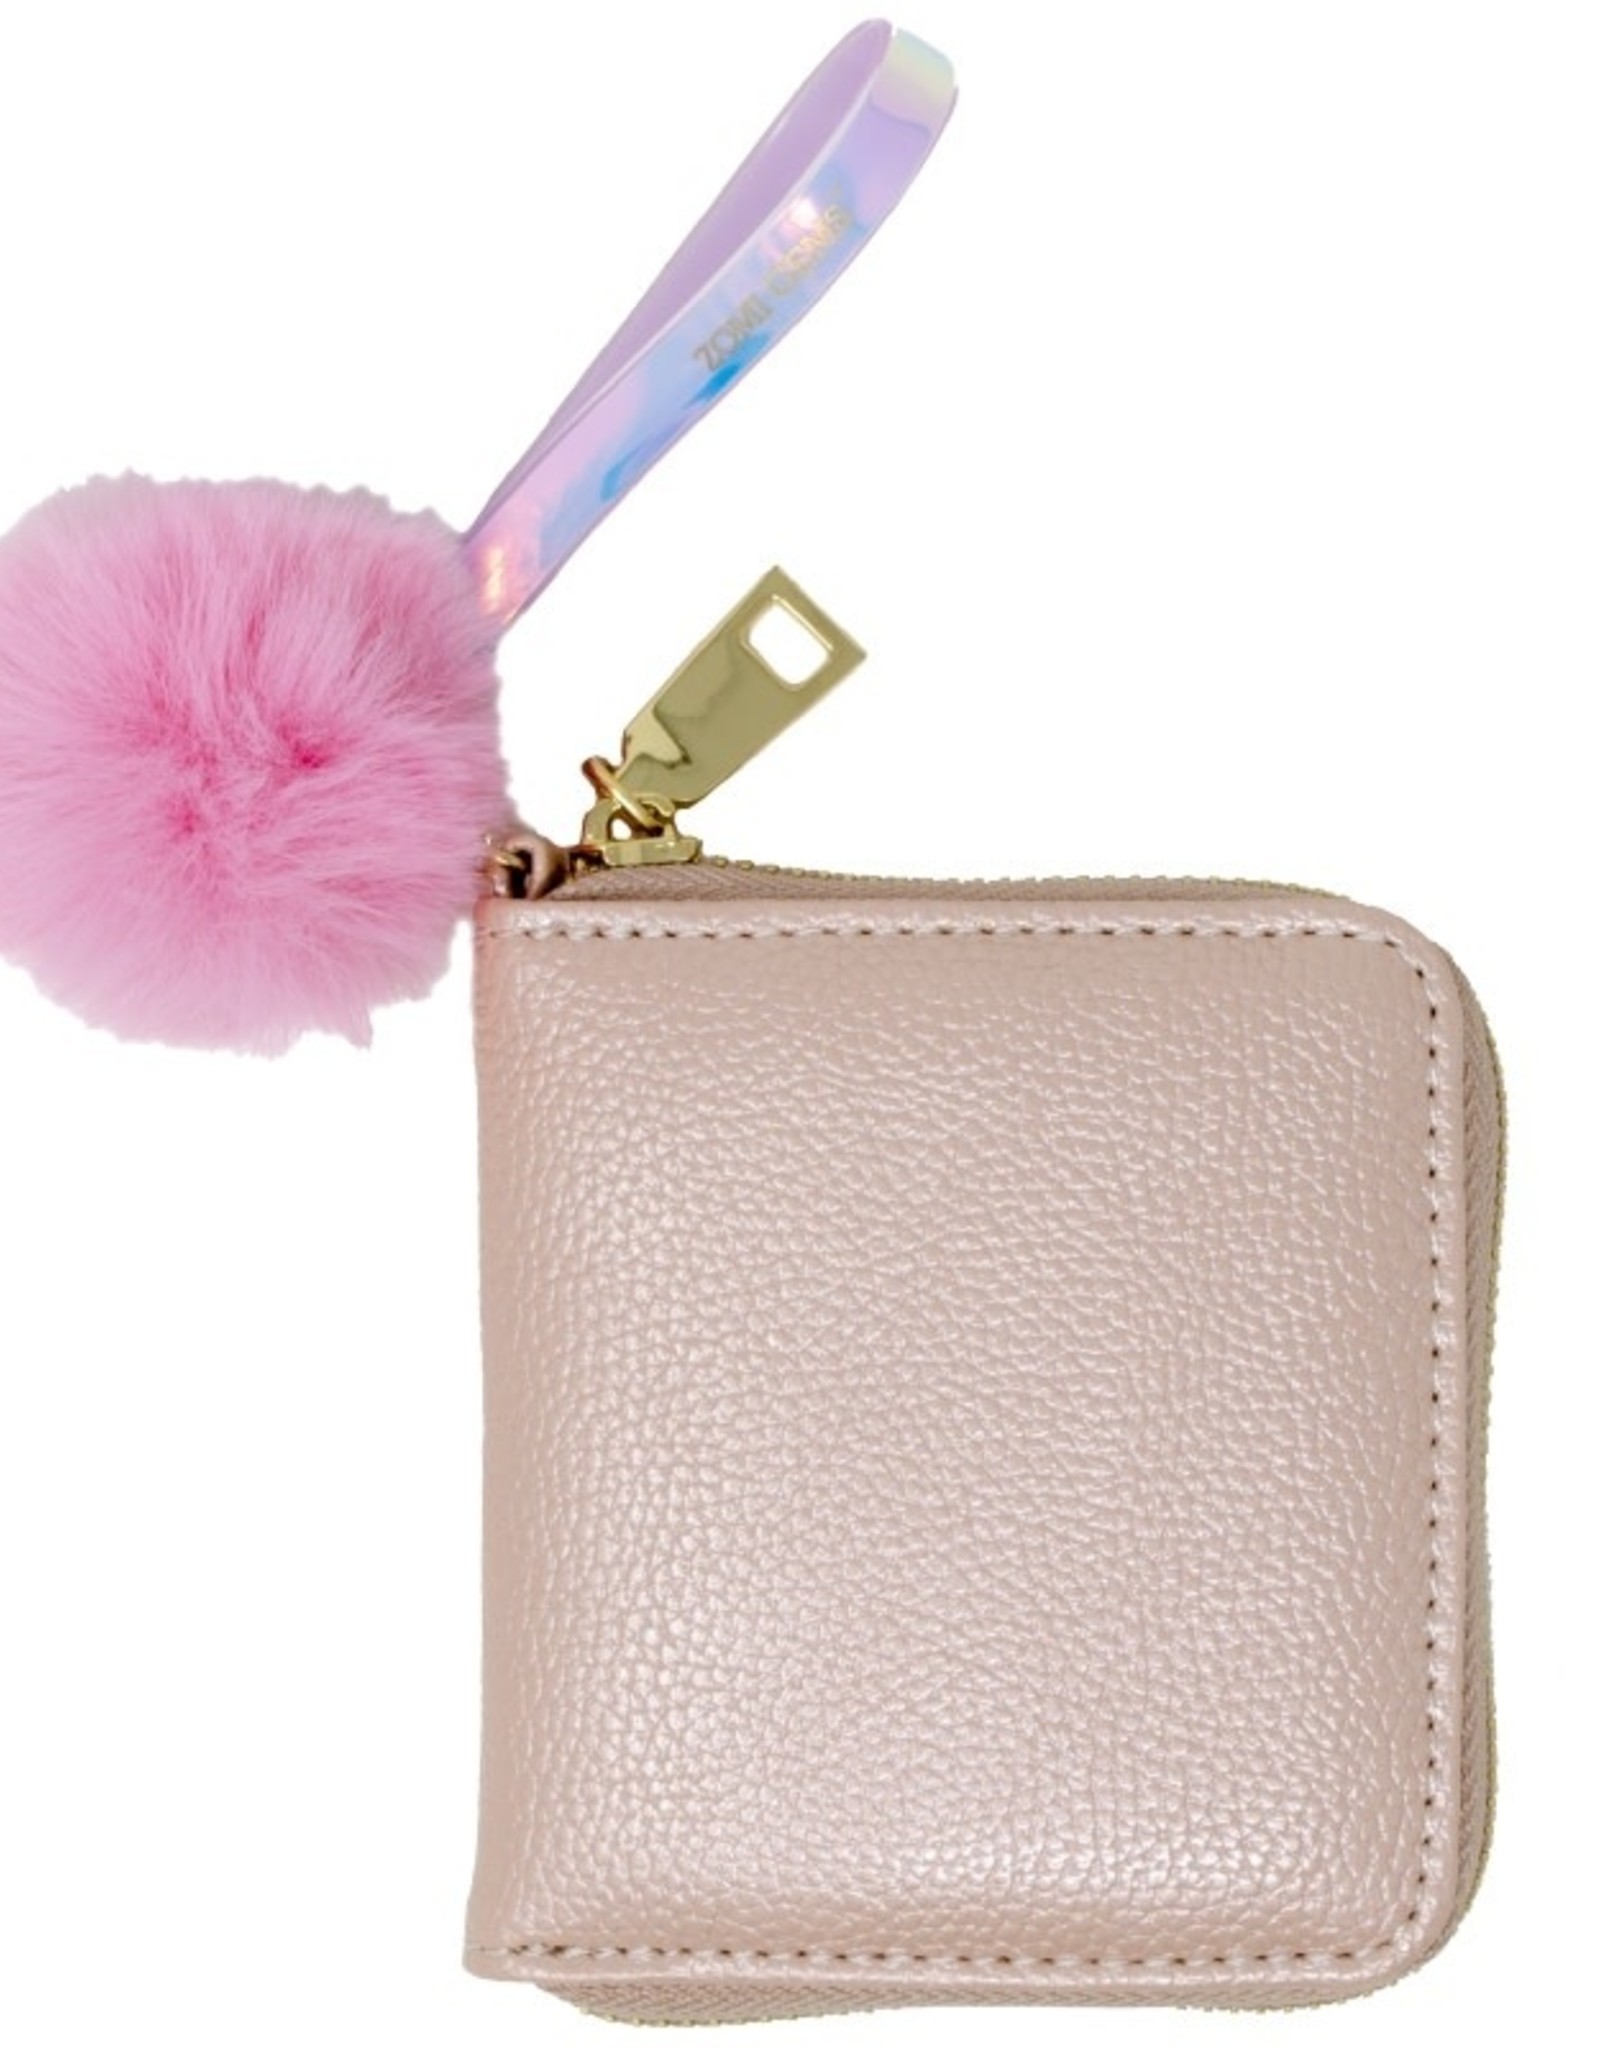 Zomi Gems Leather Wallet in Salmon